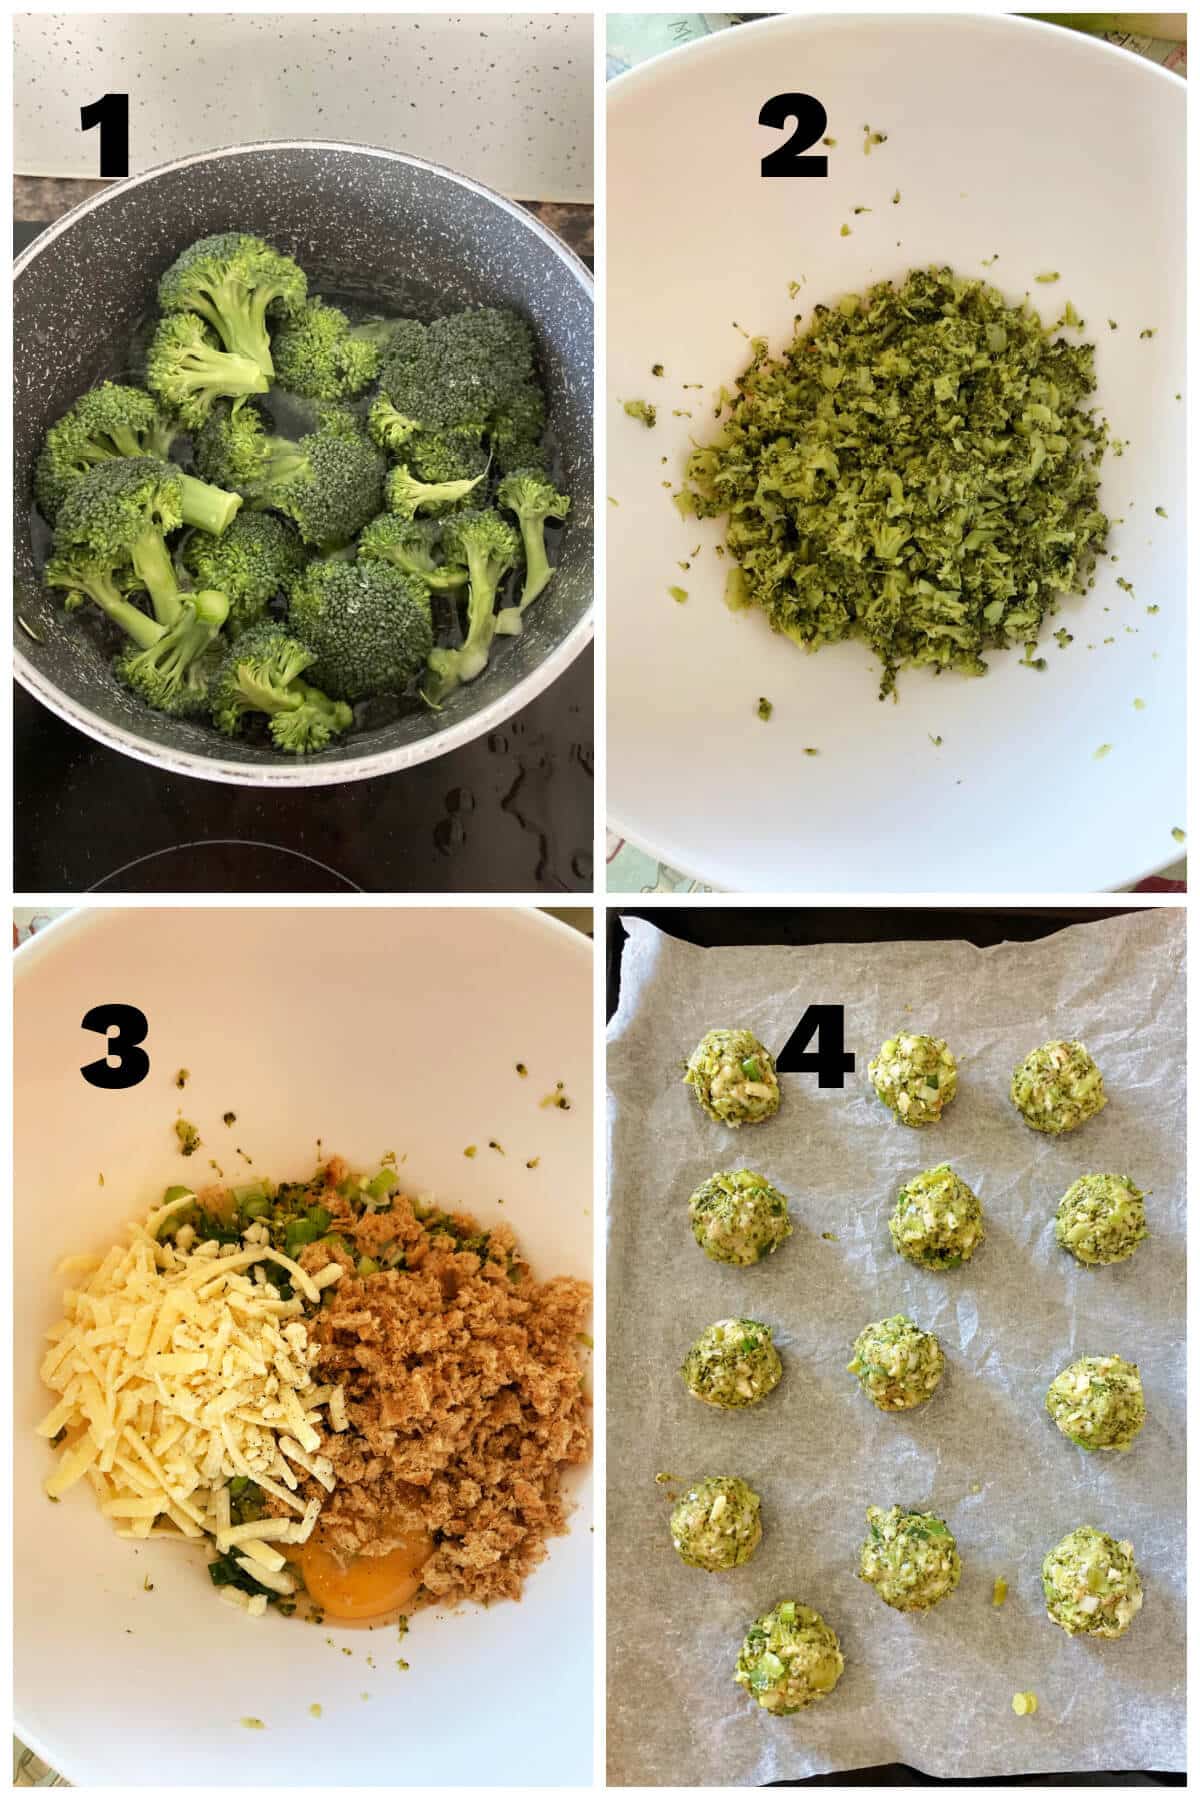 Collage of 4 photos to show how to make broccoli bites.